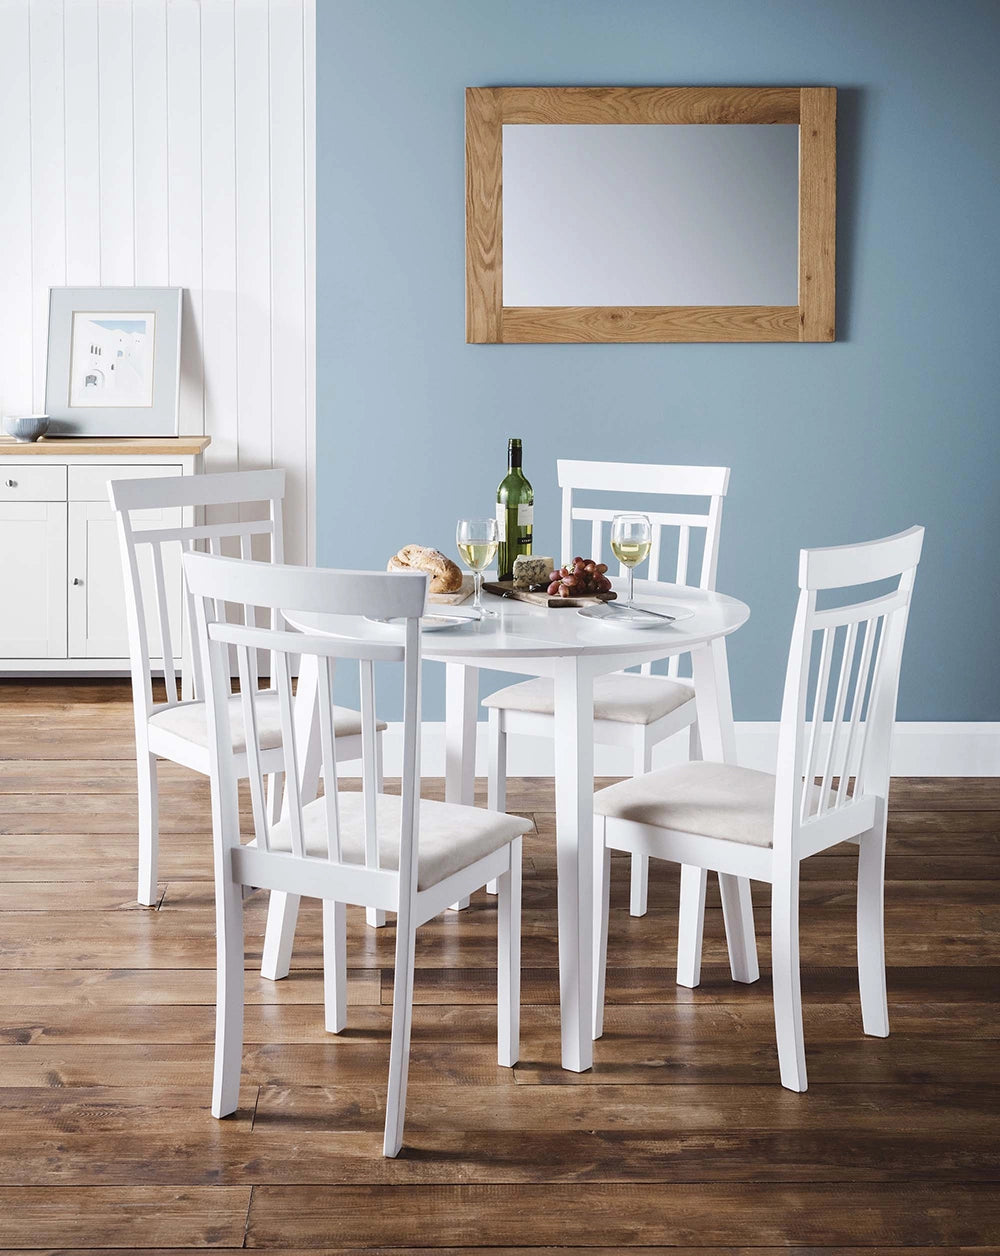 Burren Dining Chair in White Finish with Wooden Table and Cabinet in Dining Setting